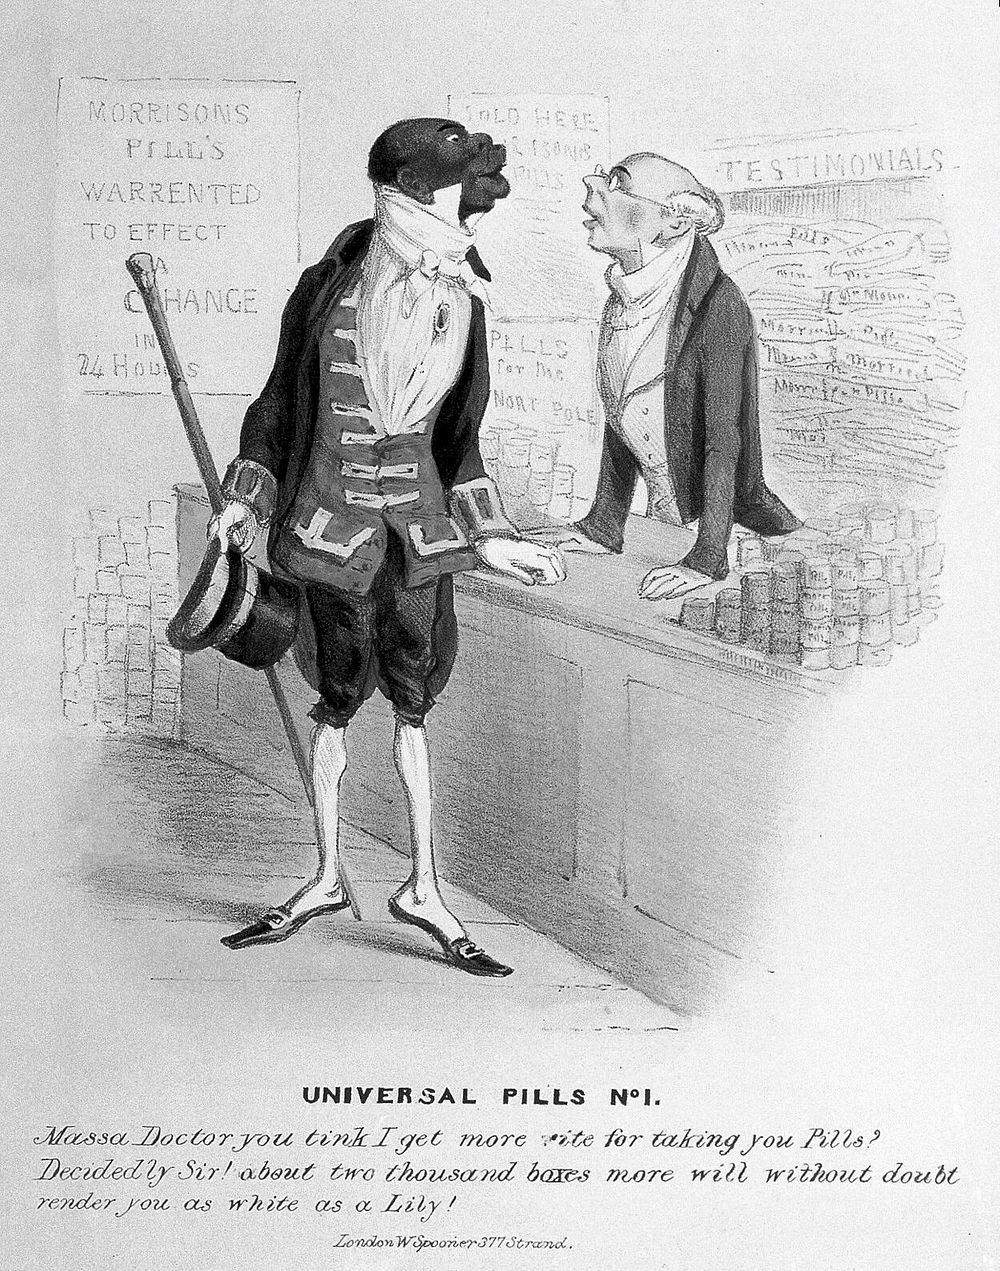 A black man buying some of J. Morison's pills, hoping they will make him white. Coloured lithograph.